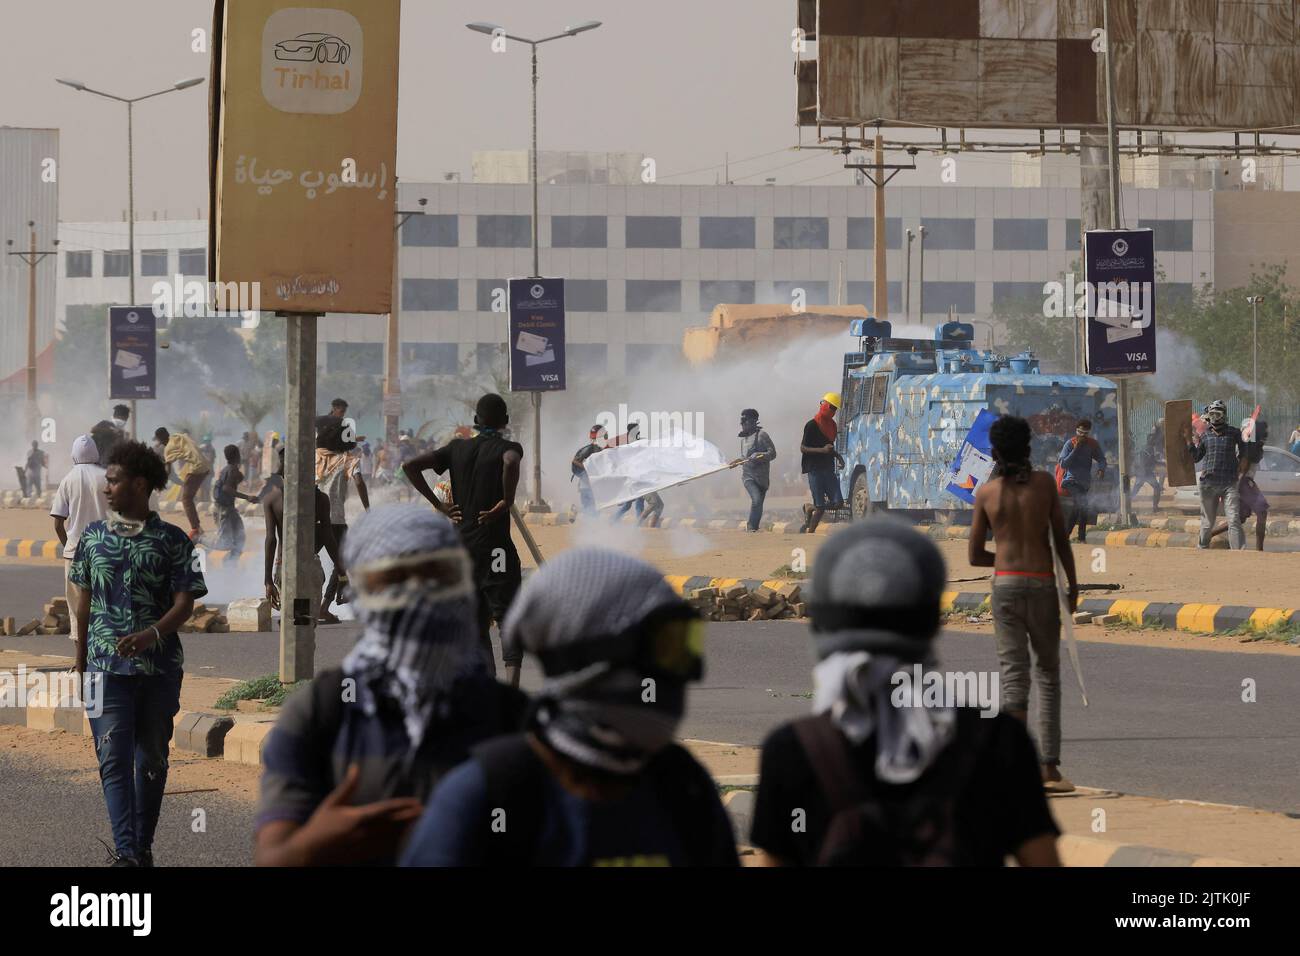 People walk near a police vehicle as protesters march during a rally against military rule following the last coup, in Khartoum, Sudan August 31, 2022. REUTERS/Mohamed Nureldin Abdallah Stock Photo